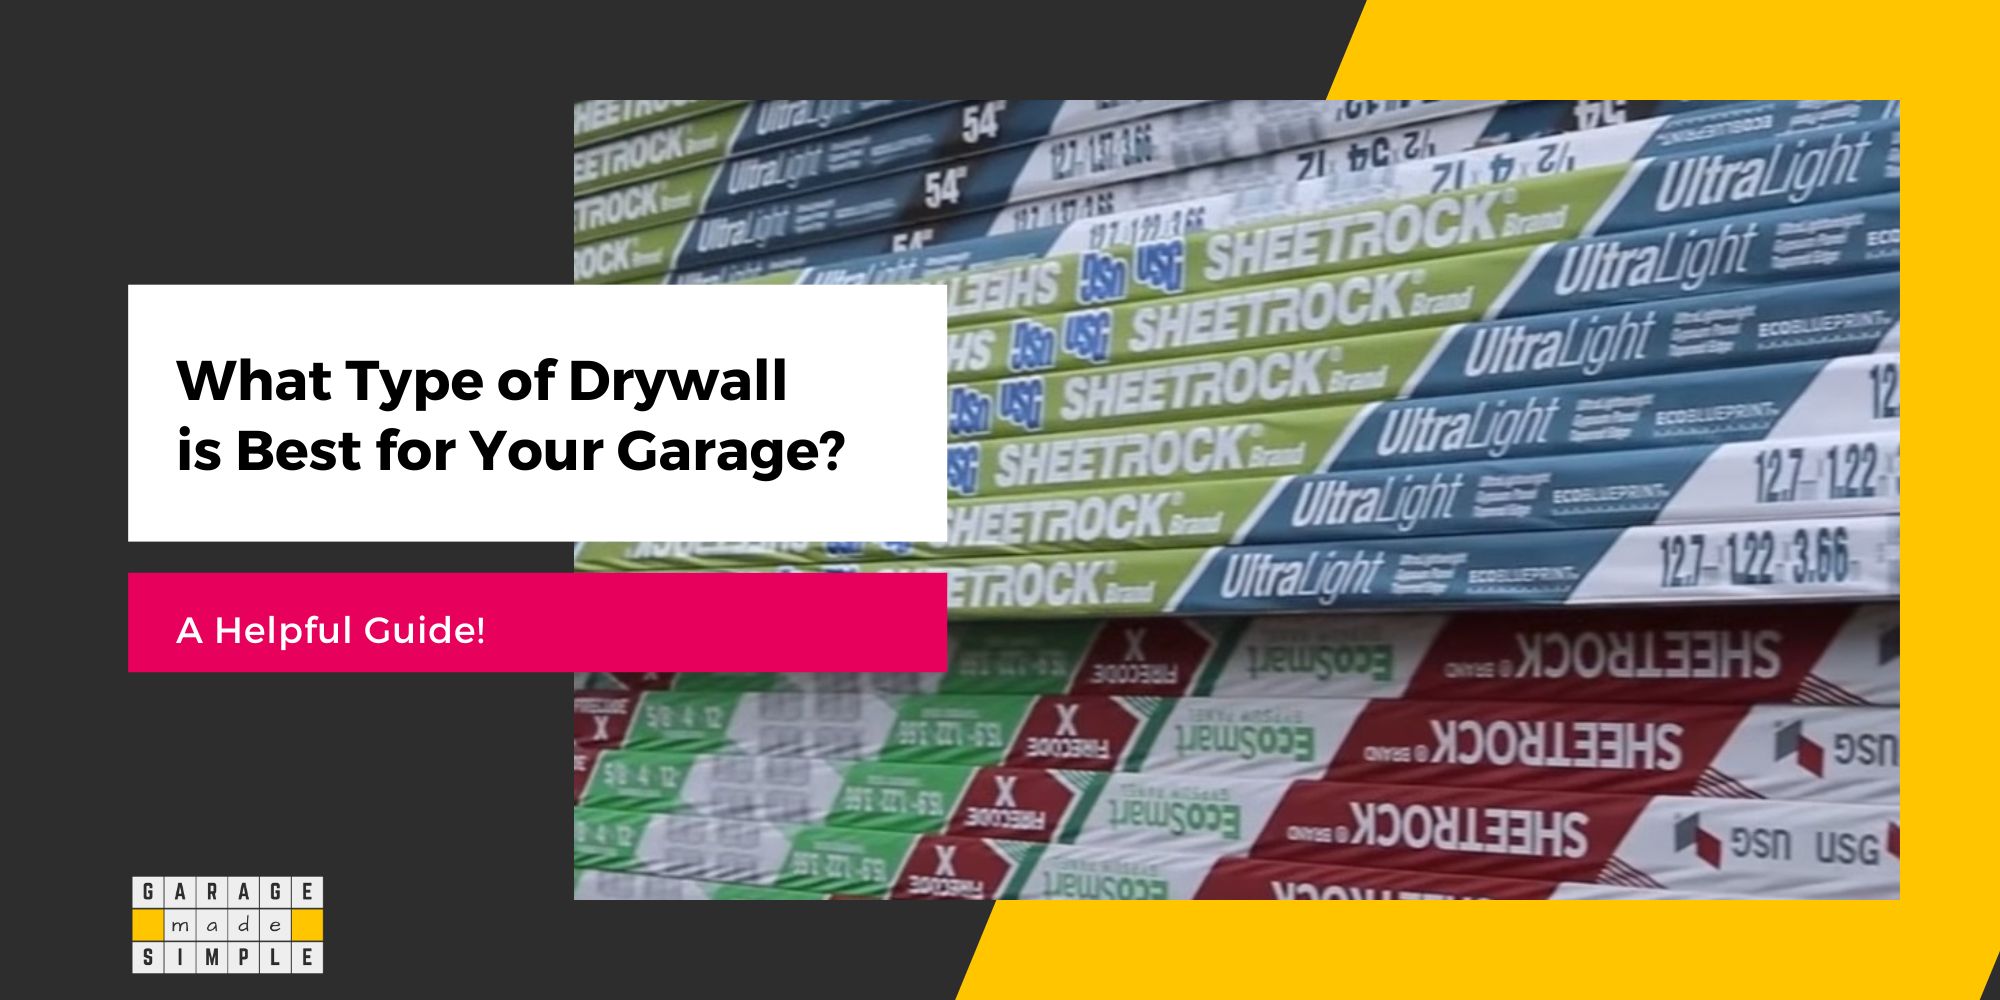 What Type of Drywall is Best for Your Garage? (A Helpful Guide!)